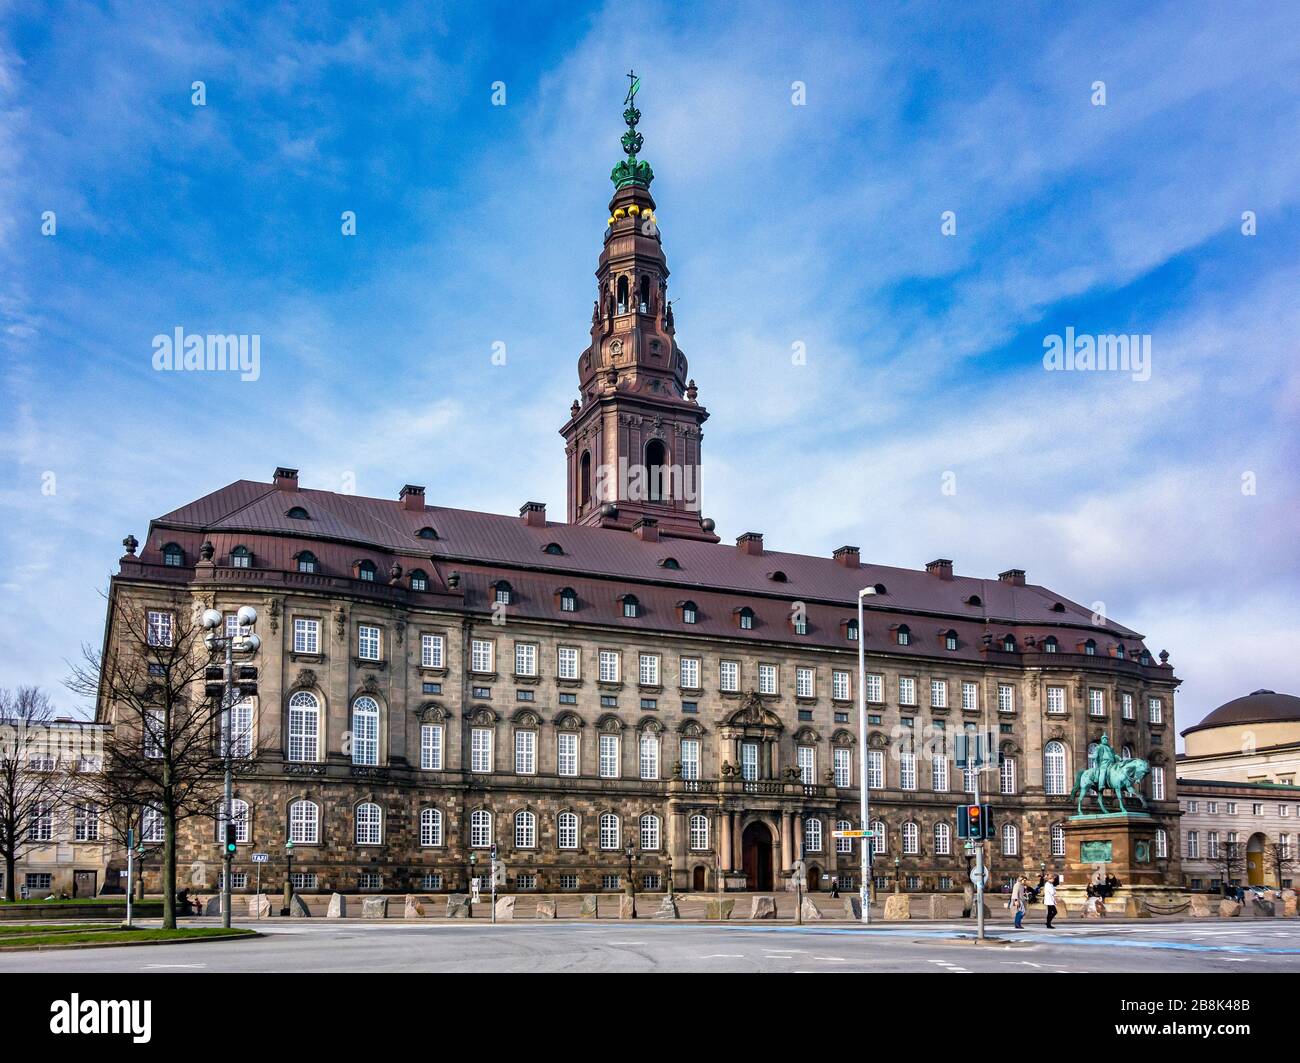 Danish parliament building (folketinget) Christiansborg Palace on Slotsholmen in Copenhagen viewed from the Palace Square in front. Stock Photo